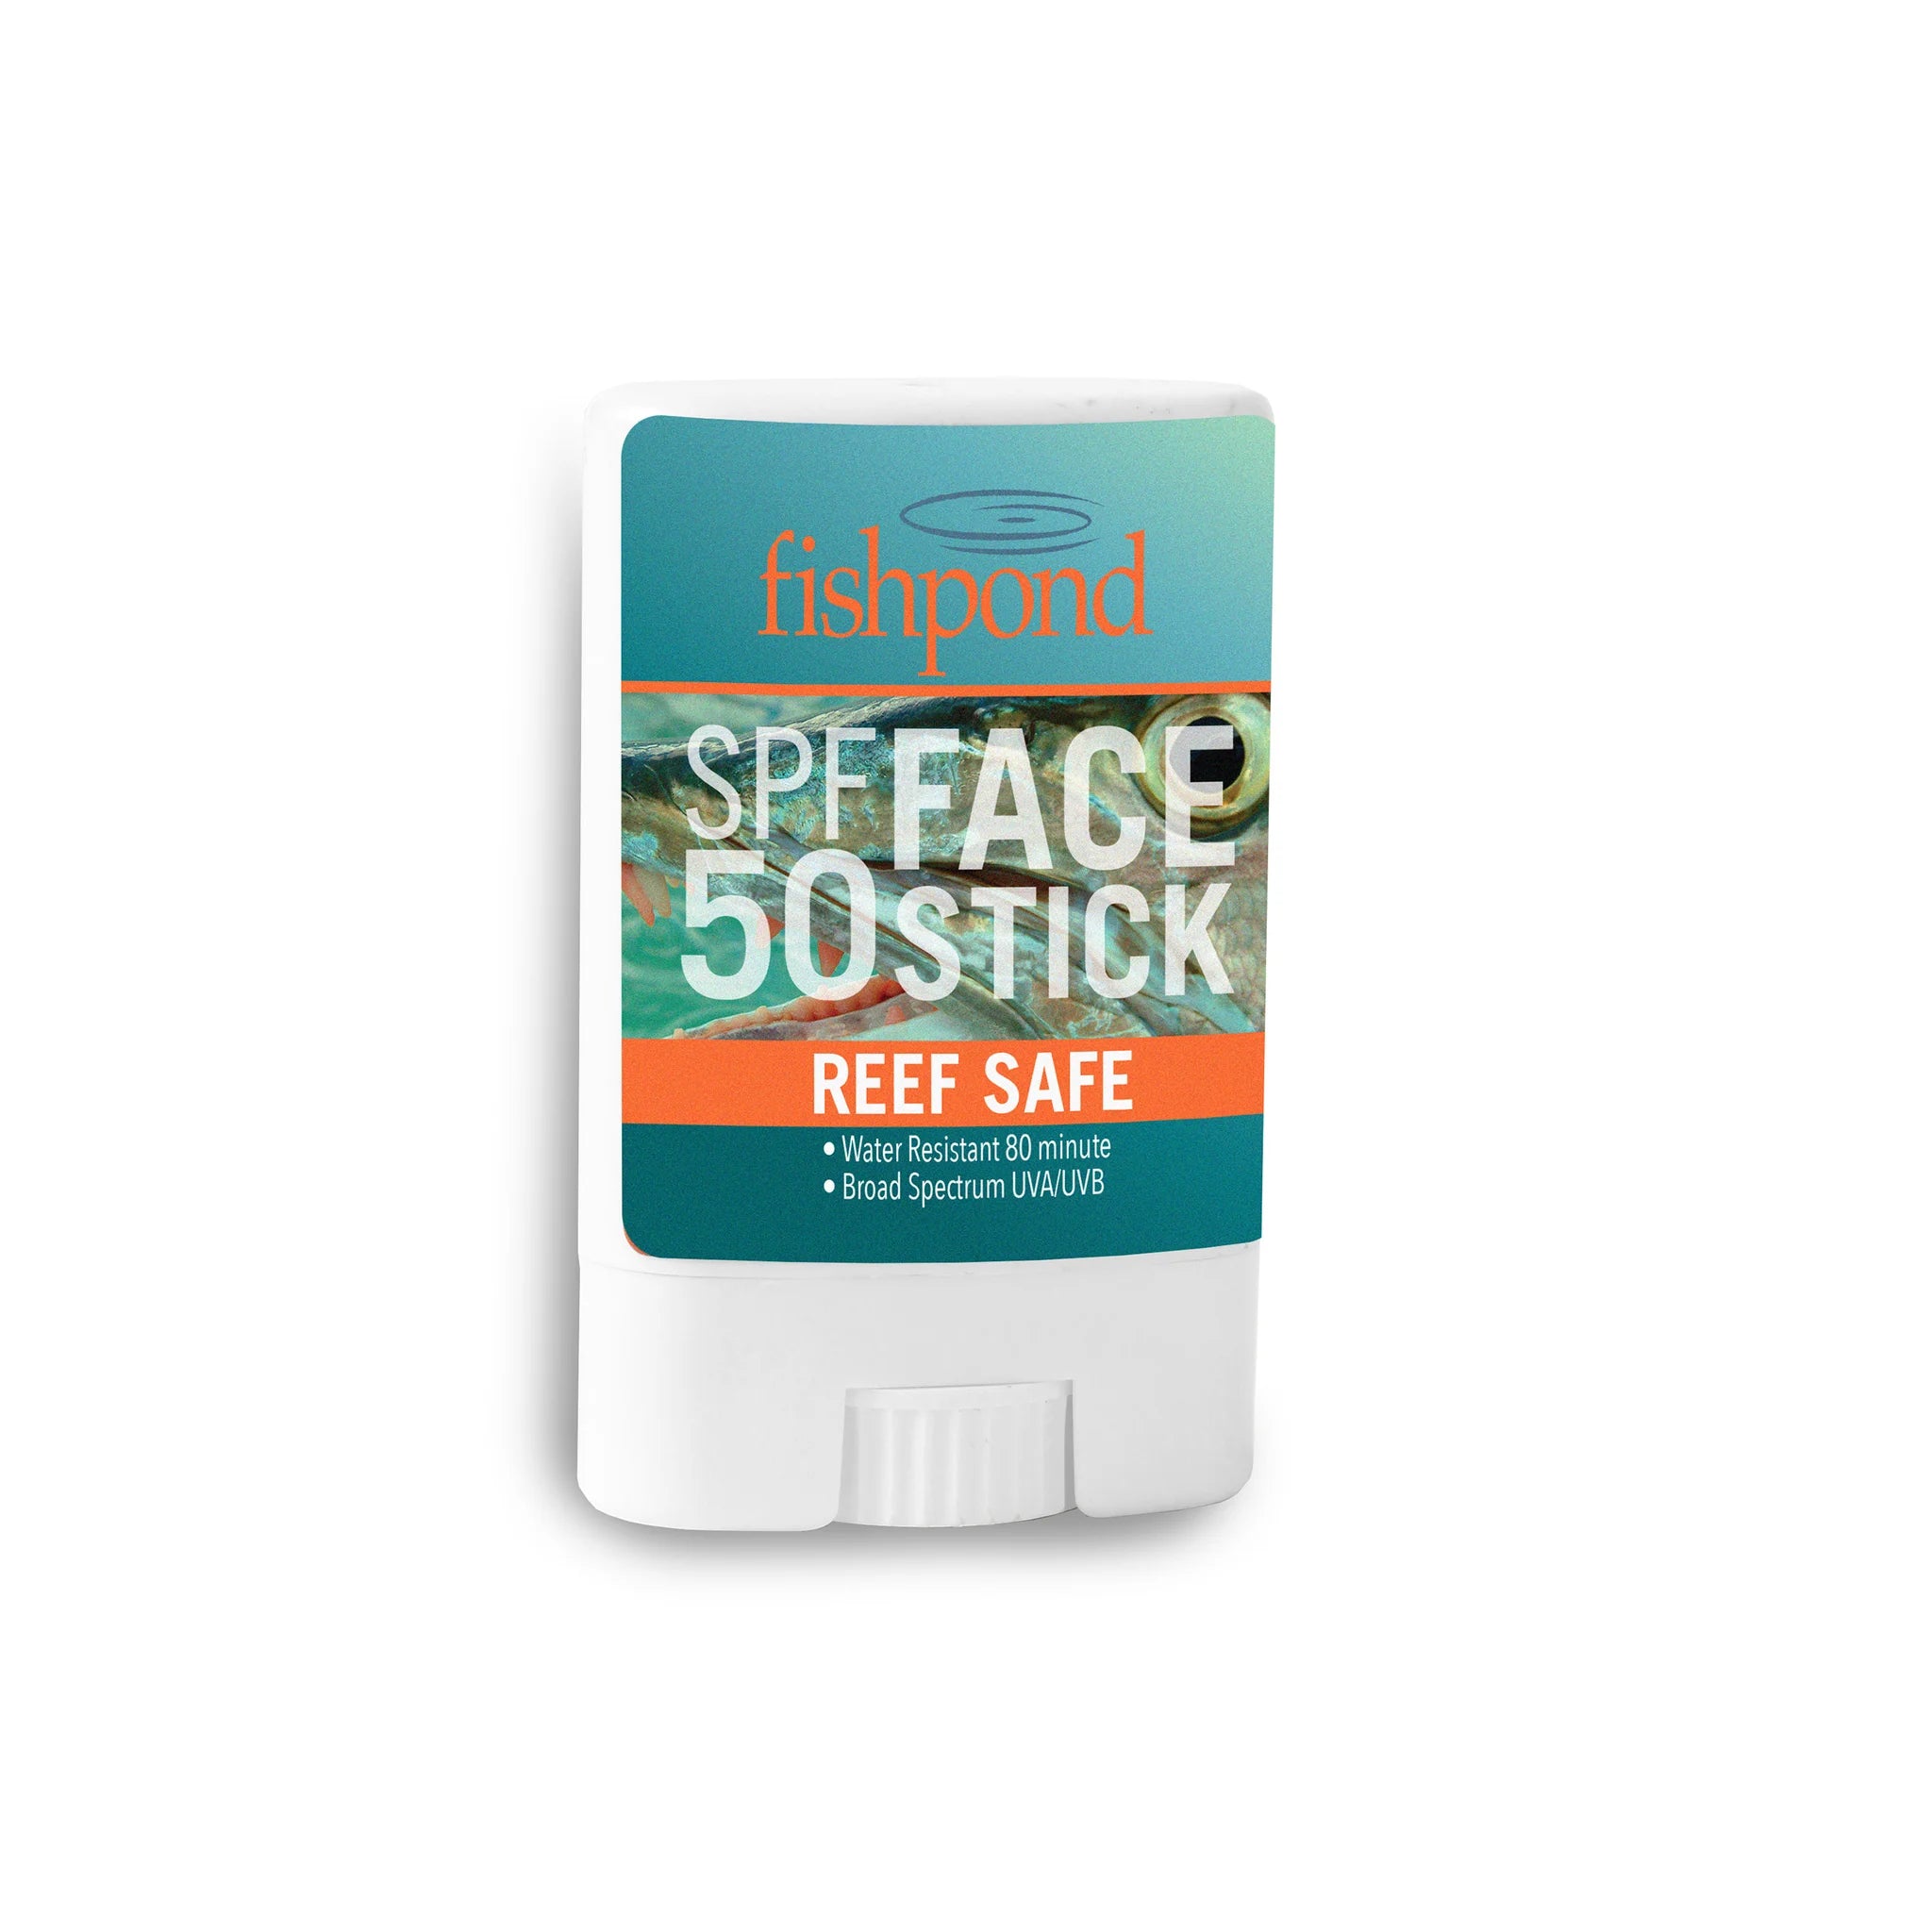 Fishpond Reef Face Stick